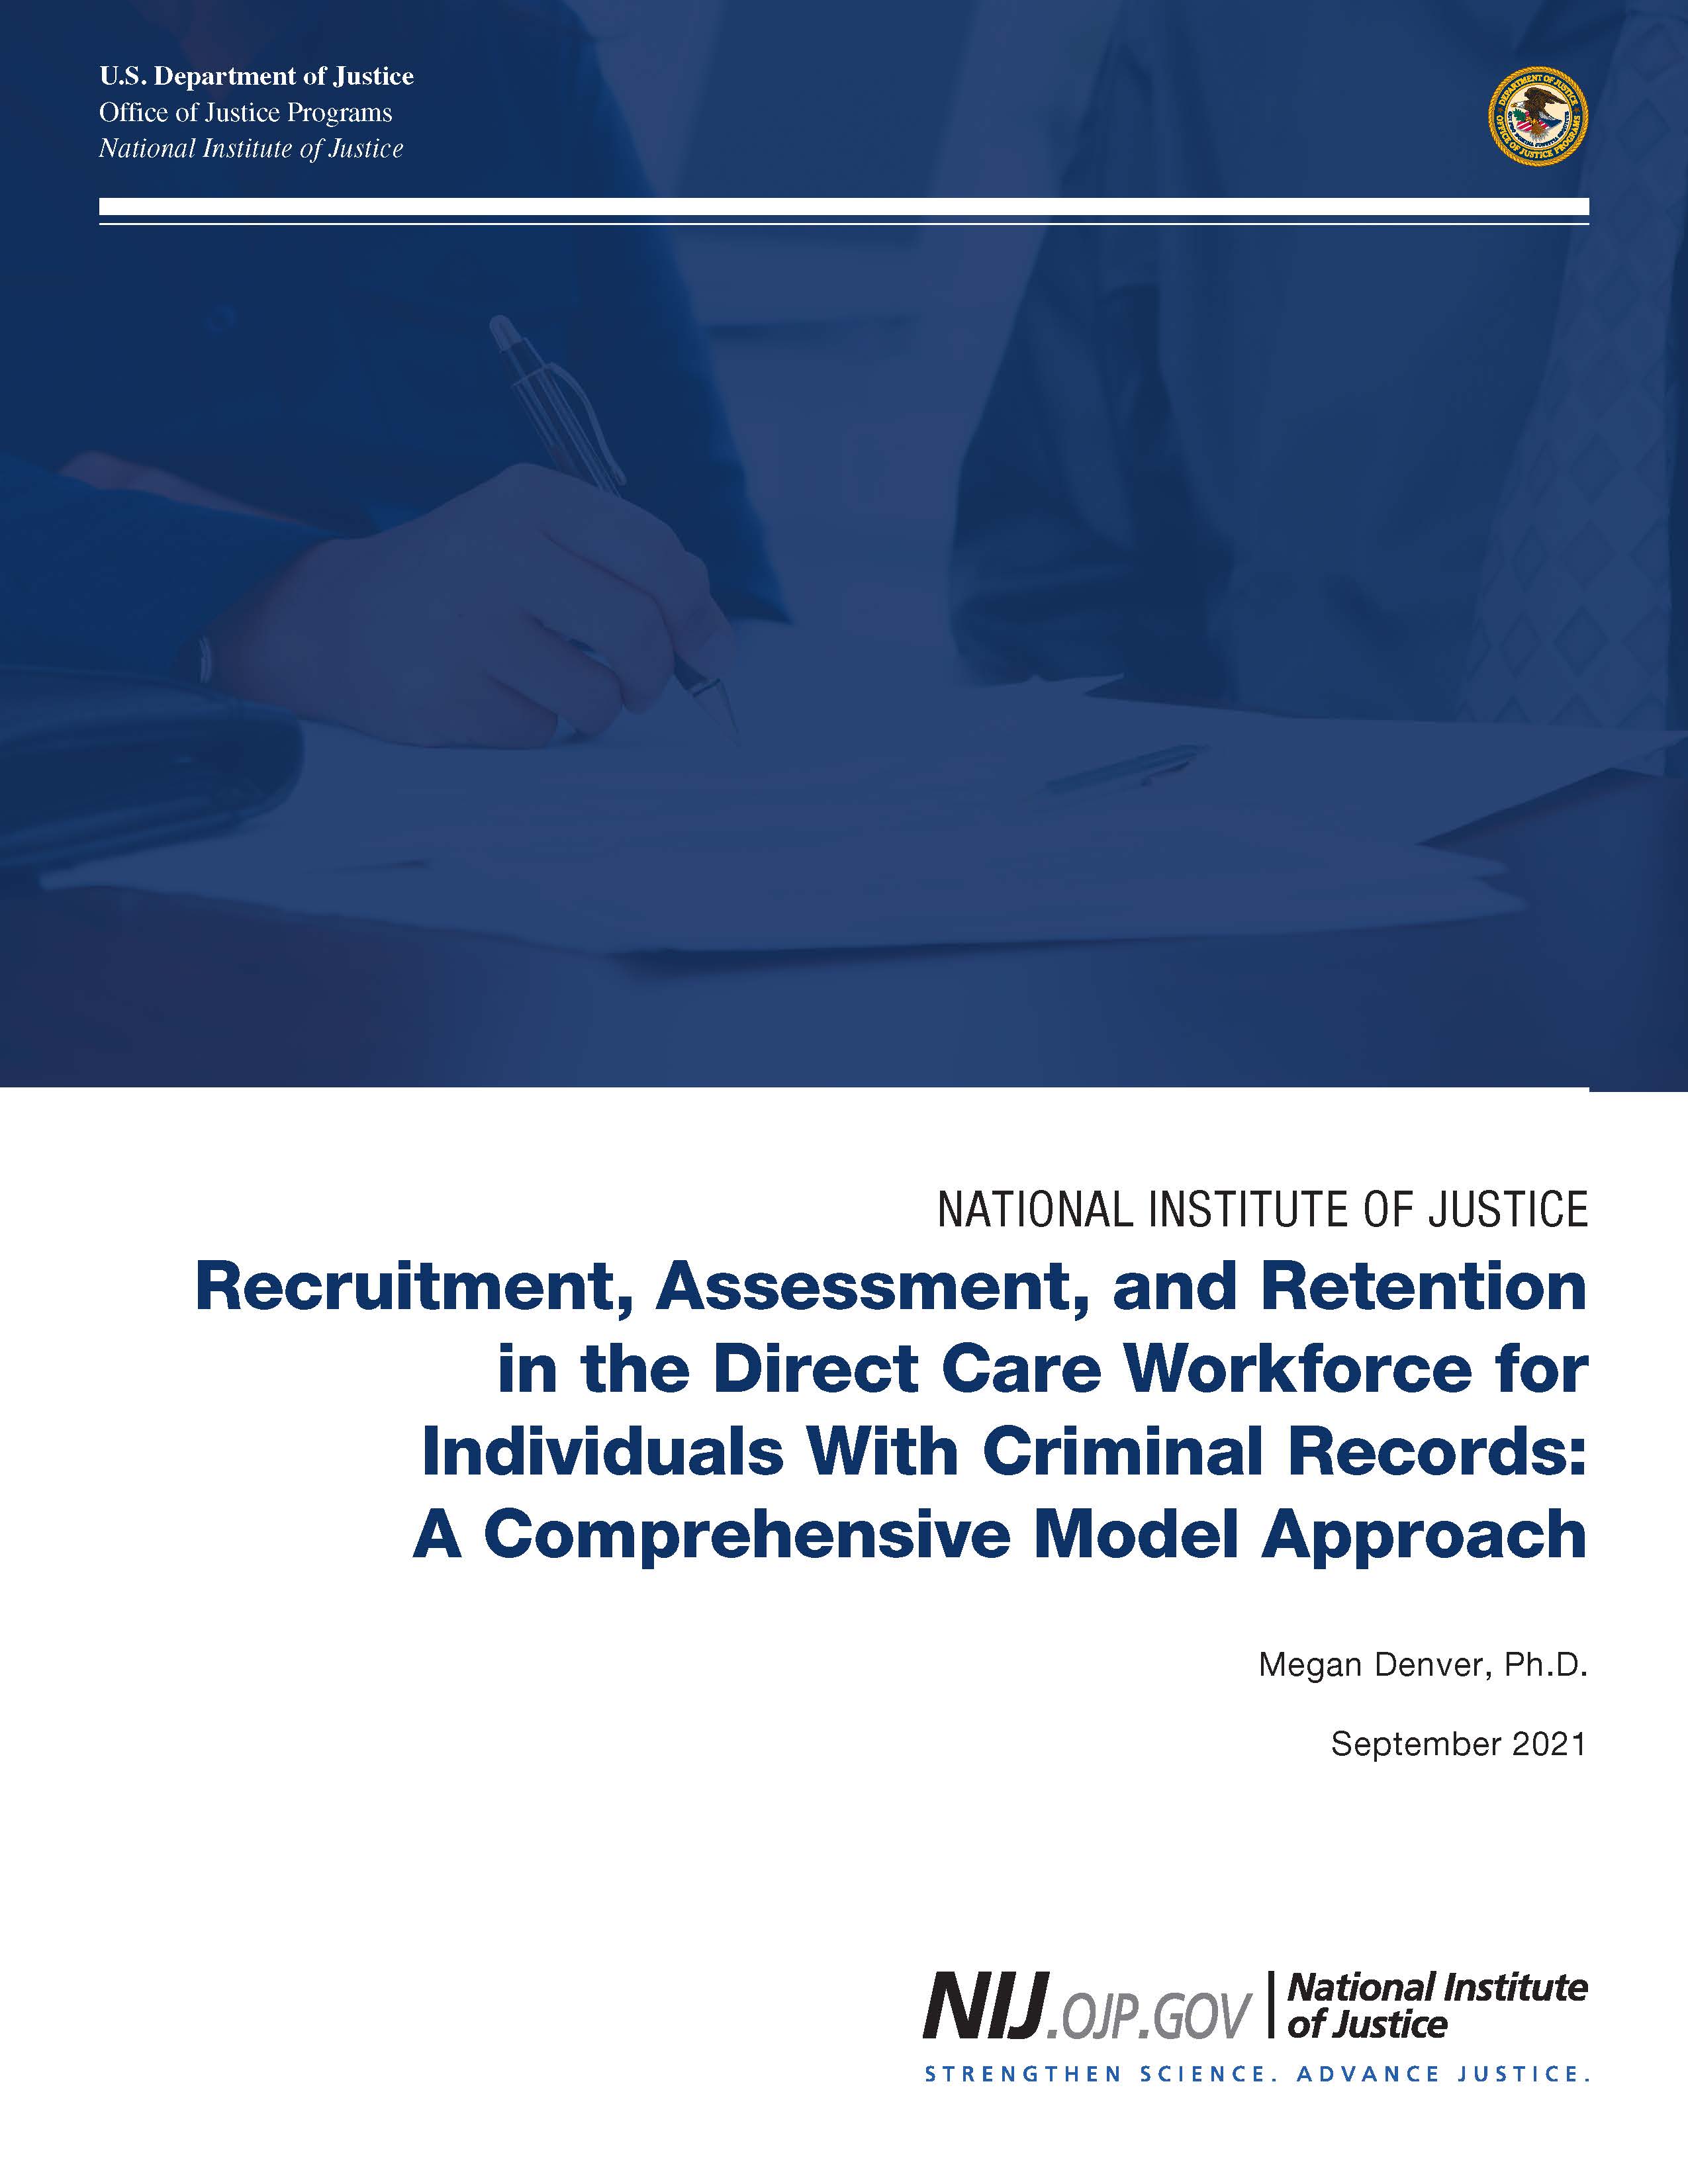 Recruitment, Assessment, and Retention in the Direct Care Workforce for Individuals With Criminal Records: A Comprehensive Model Approach